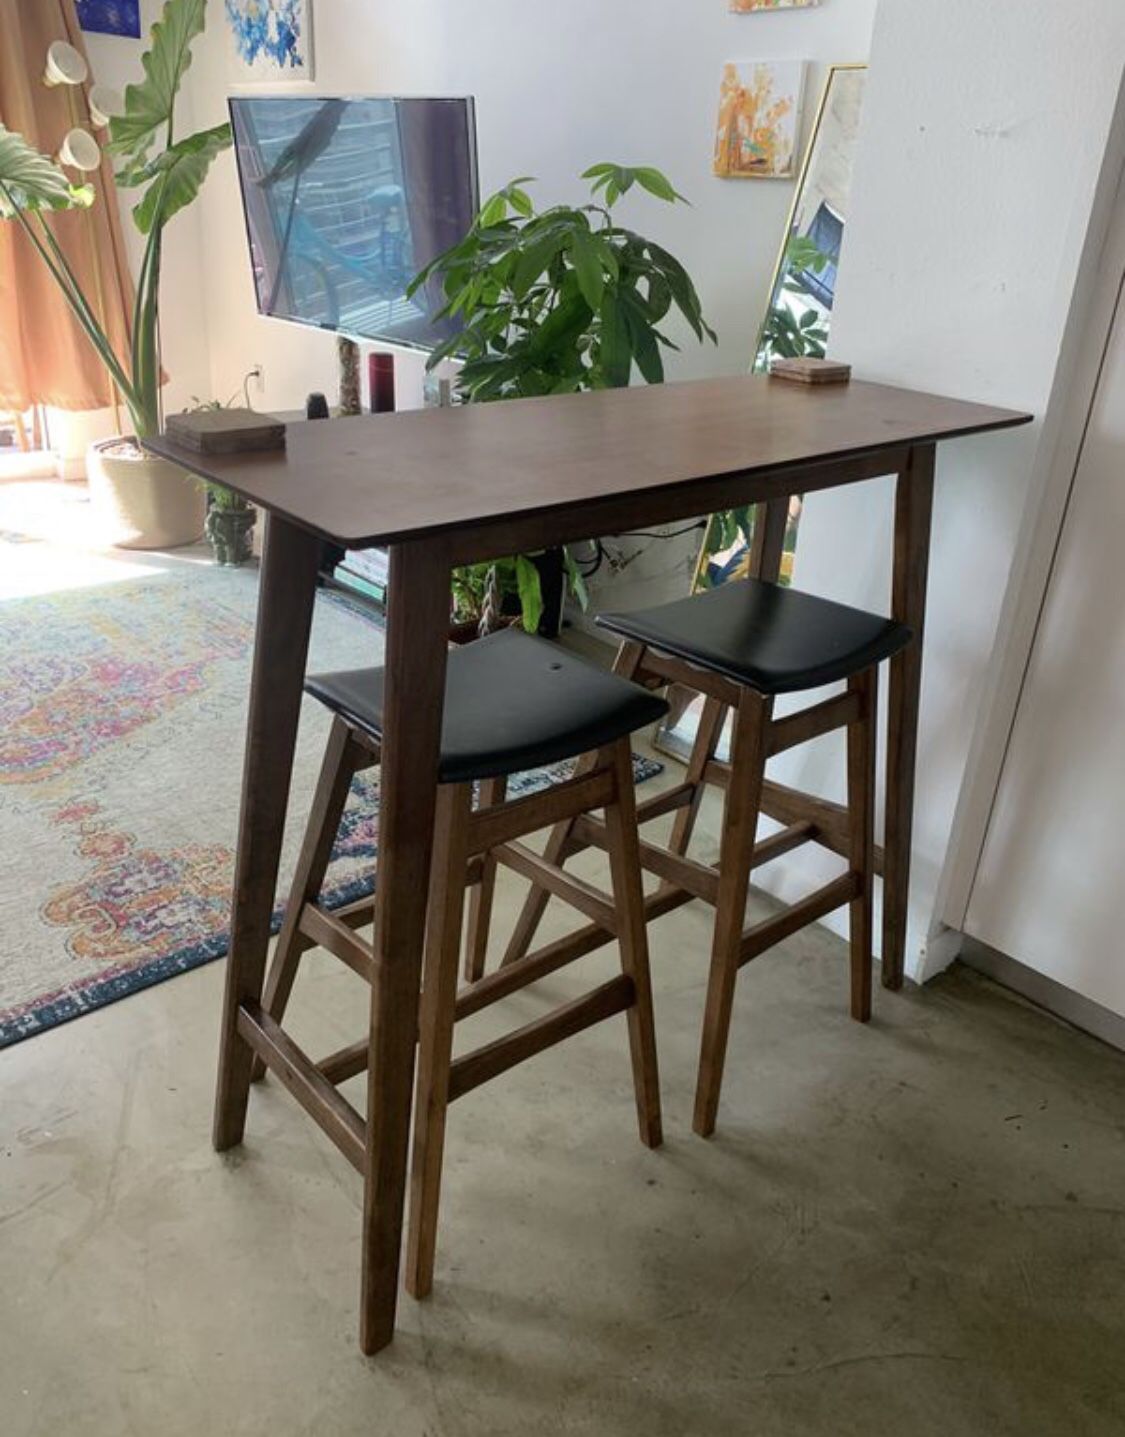 Tall Wooden Dining Table with 2 Bar Stools